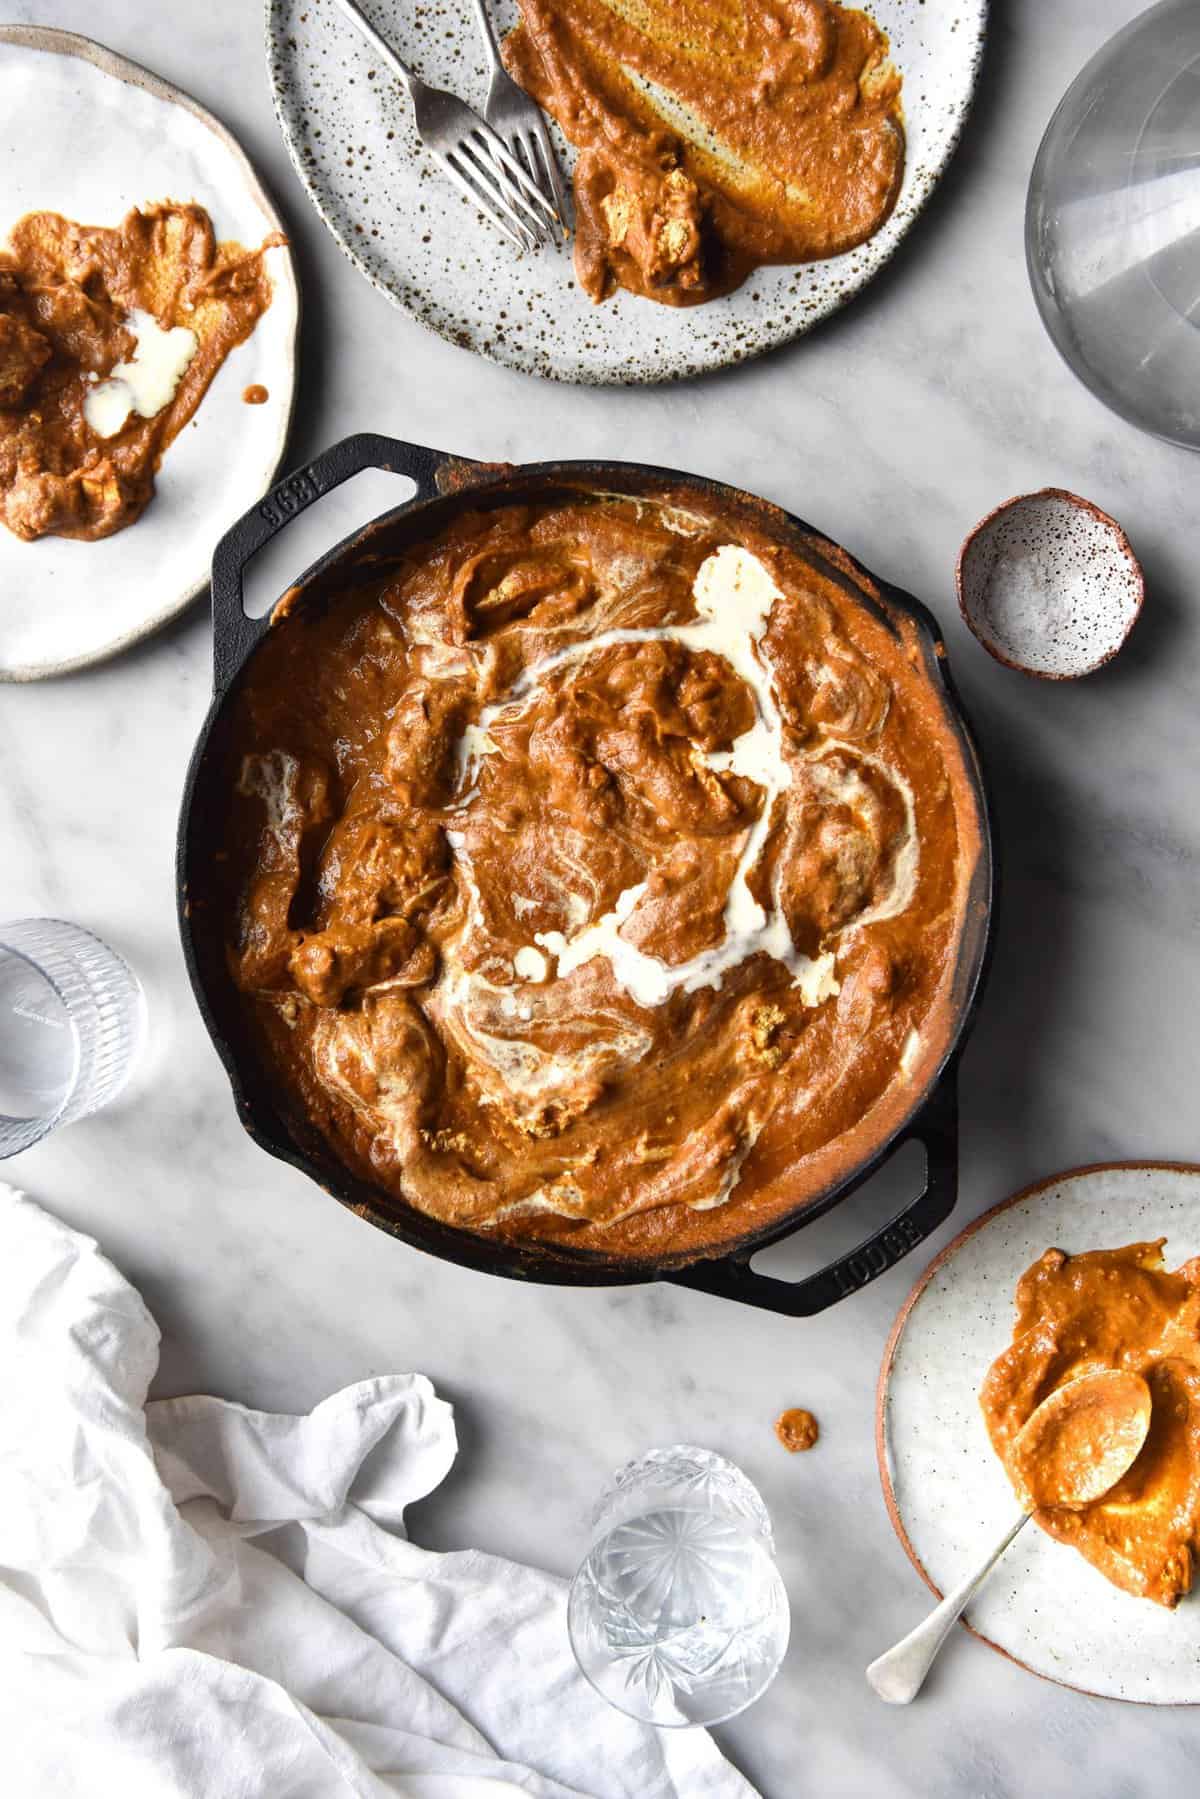 An aerial view of a skillet filled with FODMAP friendly curry that has been topped with a swirl of cream. The skillet sits atop a white marble table which is surrounded by plates of curry, water glasses and a white linen tablecloth.